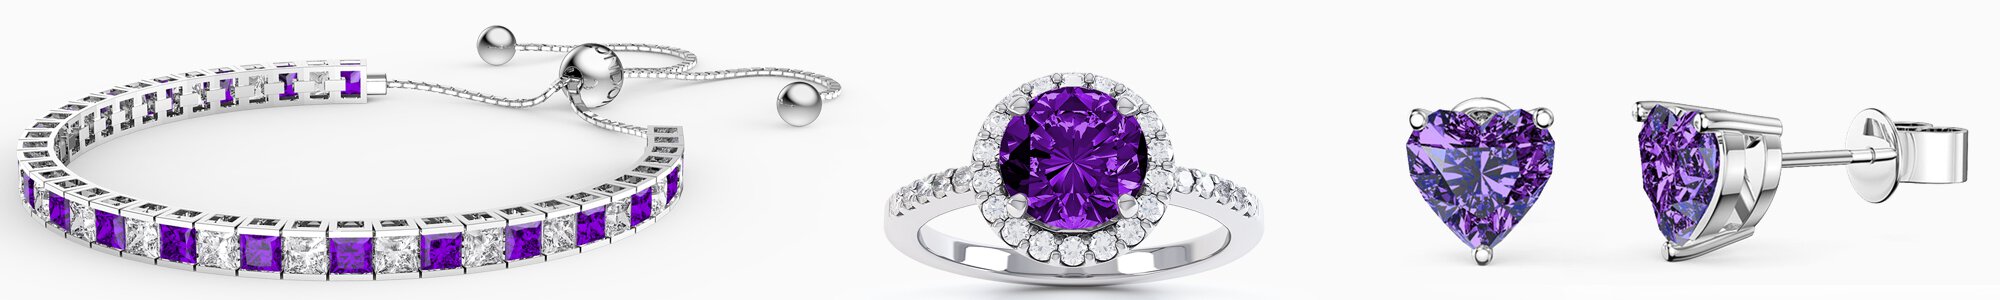 Amethyst Jewelry - from Earrings to Pendants to Rings to Bracelets